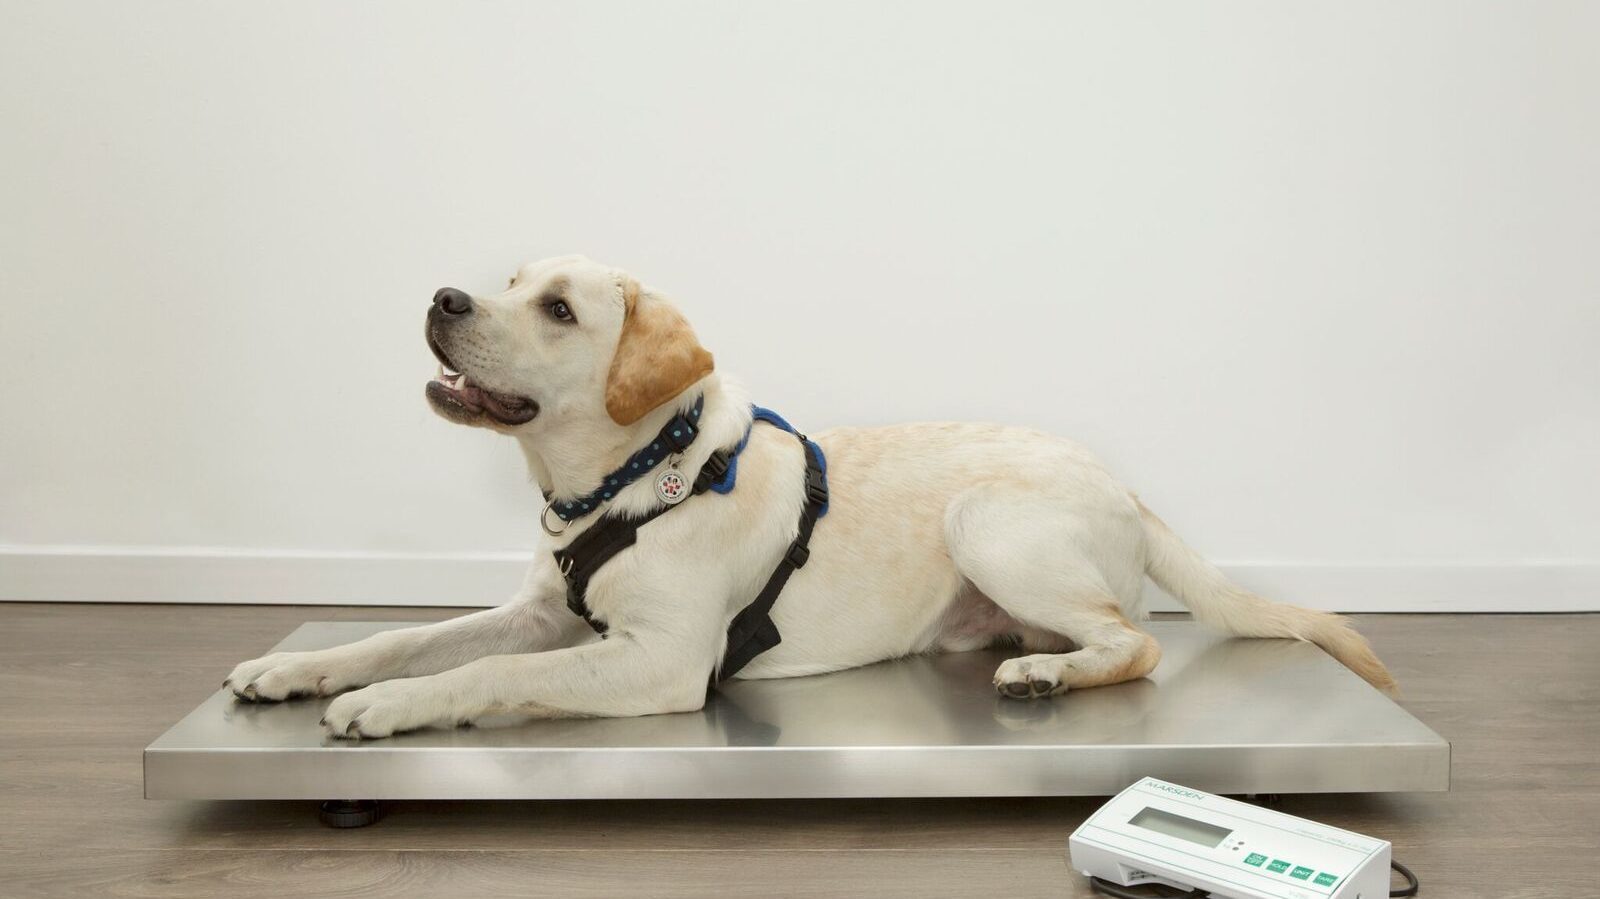 We donated a V-250 Veterinary Scale to mental health charity